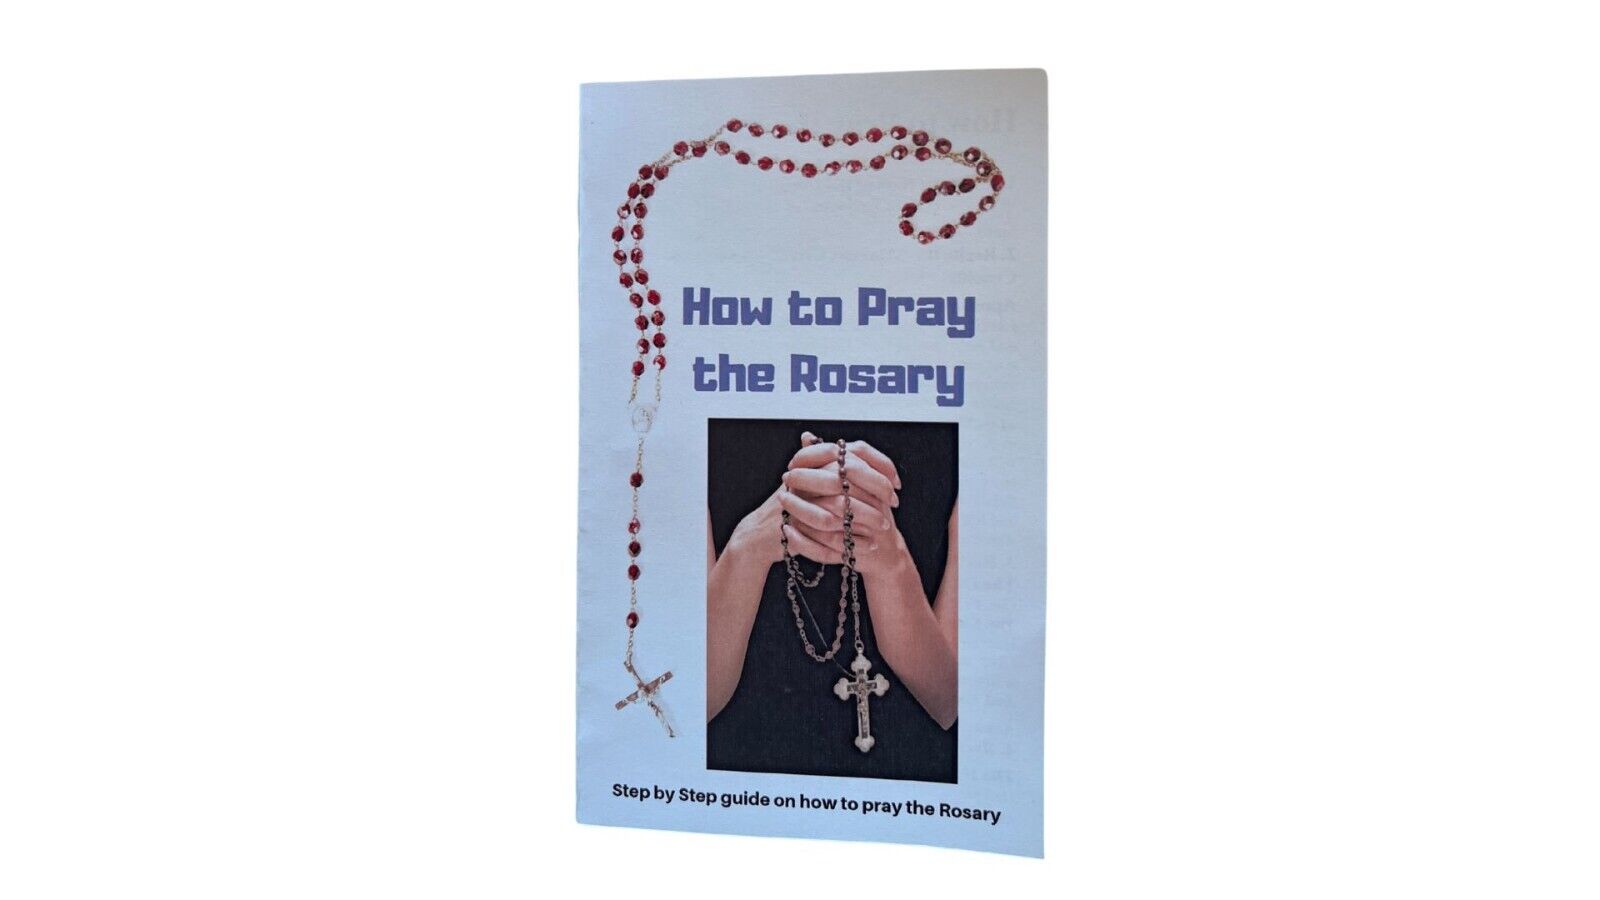 How to Pray the Rosary Prayer Card 50 Pack - Bob and Penny Lord